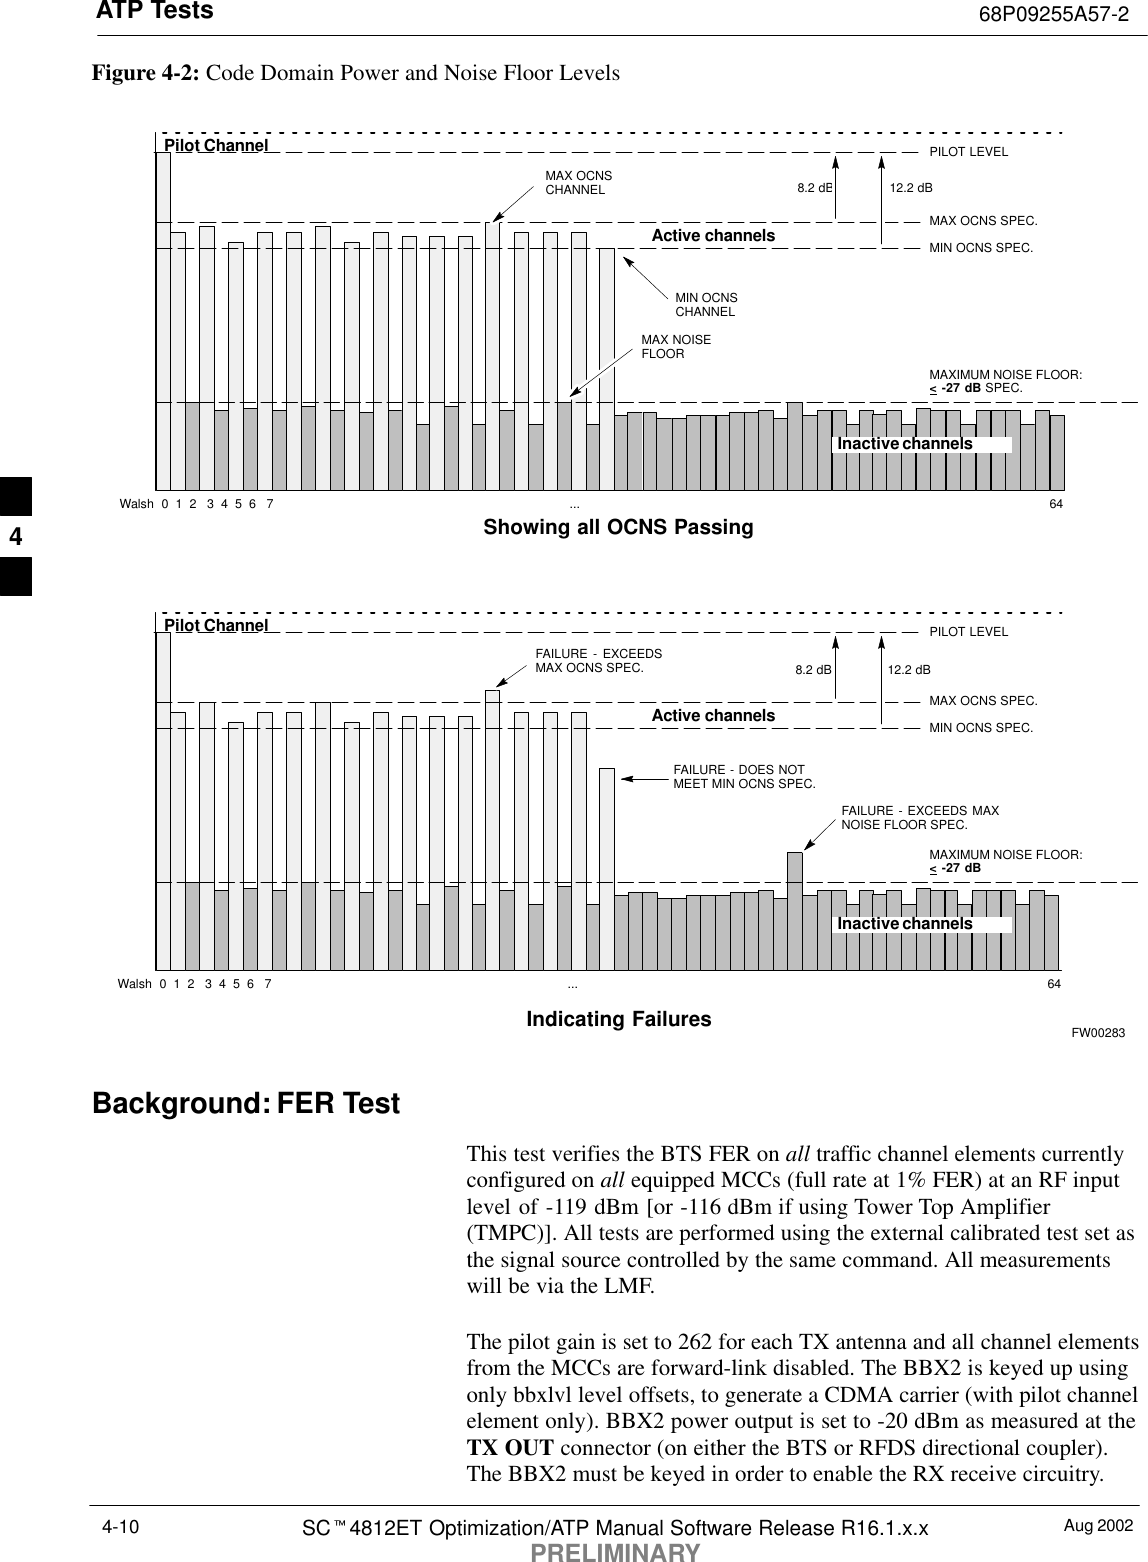 ATP Tests 68P09255A57-2Aug 2002SCt4812ET Optimization/ATP Manual Software Release R16.1.x.xPRELIMINARY4-10Figure 4-2: Code Domain Power and Noise Floor LevelsPilot ChannelActive channelsPILOT LEVELMAX OCNS SPEC.MIN OCNS SPEC.MAXIMUM NOISE FLOOR: &lt; -27 dB SPEC.Inactive channelsWalsh  0  1  2   3  4  5  6   7  ... 64MAX OCNSCHANNELMIN OCNSCHANNEL8.2 dB 12.2 dBMAX NOISEFLOORPilot ChannelActive channelsPILOT LEVELMAX OCNS SPEC.MIN OCNS SPEC.MAXIMUM NOISE FLOOR:&lt; -27 dBInactive channelsWalsh  0  1  2   3  4  5  6   7  ... 64FAILURE - DOES NOTMEET MIN OCNS SPEC.FAILURE - EXCEEDSMAX OCNS SPEC. 8.2 dB 12.2 dBFAILURE - EXCEEDS MAXNOISE FLOOR SPEC. Showing all OCNS Passing Indicating Failures FW00283Background: FER TestThis test verifies the BTS FER on all traffic channel elements currentlyconfigured on all equipped MCCs (full rate at 1% FER) at an RF inputlevel of -119 dBm [or -116 dBm if using Tower Top Amplifier(TMPC)]. All tests are performed using the external calibrated test set asthe signal source controlled by the same command. All measurementswill be via the LMF.The pilot gain is set to 262 for each TX antenna and all channel elementsfrom the MCCs are forward-link disabled. The BBX2 is keyed up usingonly bbxlvl level offsets, to generate a CDMA carrier (with pilot channelelement only). BBX2 power output is set to -20 dBm as measured at theTX OUT connector (on either the BTS or RFDS directional coupler).The BBX2 must be keyed in order to enable the RX receive circuitry.4